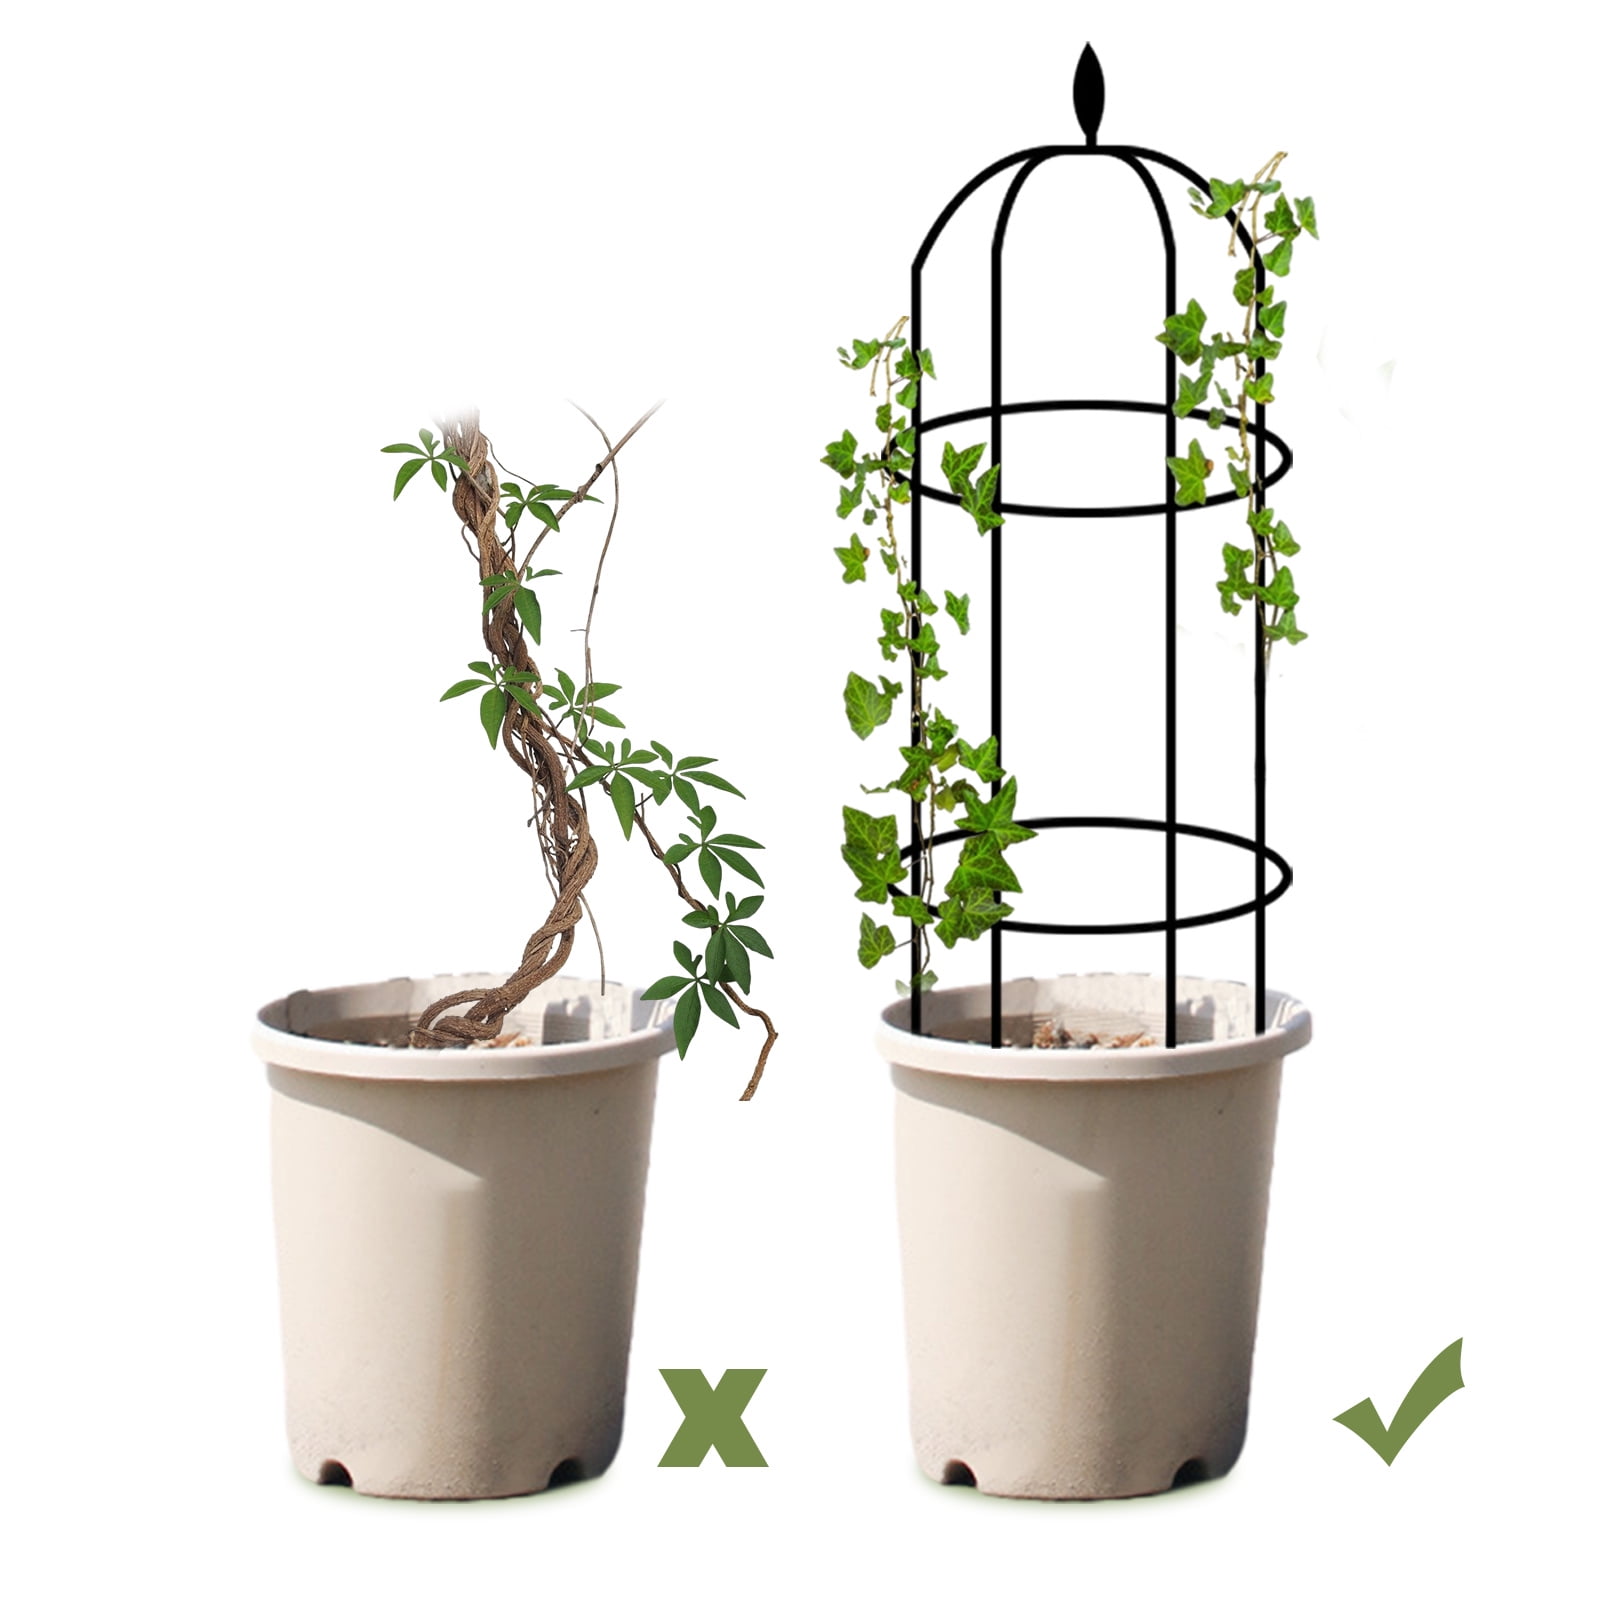 LJZX Garden plant stand DIY Garden Trellis Obelisk Plant Steel Frame Steel Resin Made Thickened Durable Stand for Climbing Plant Vines Home Potted Plant Fastening and lightfastness 